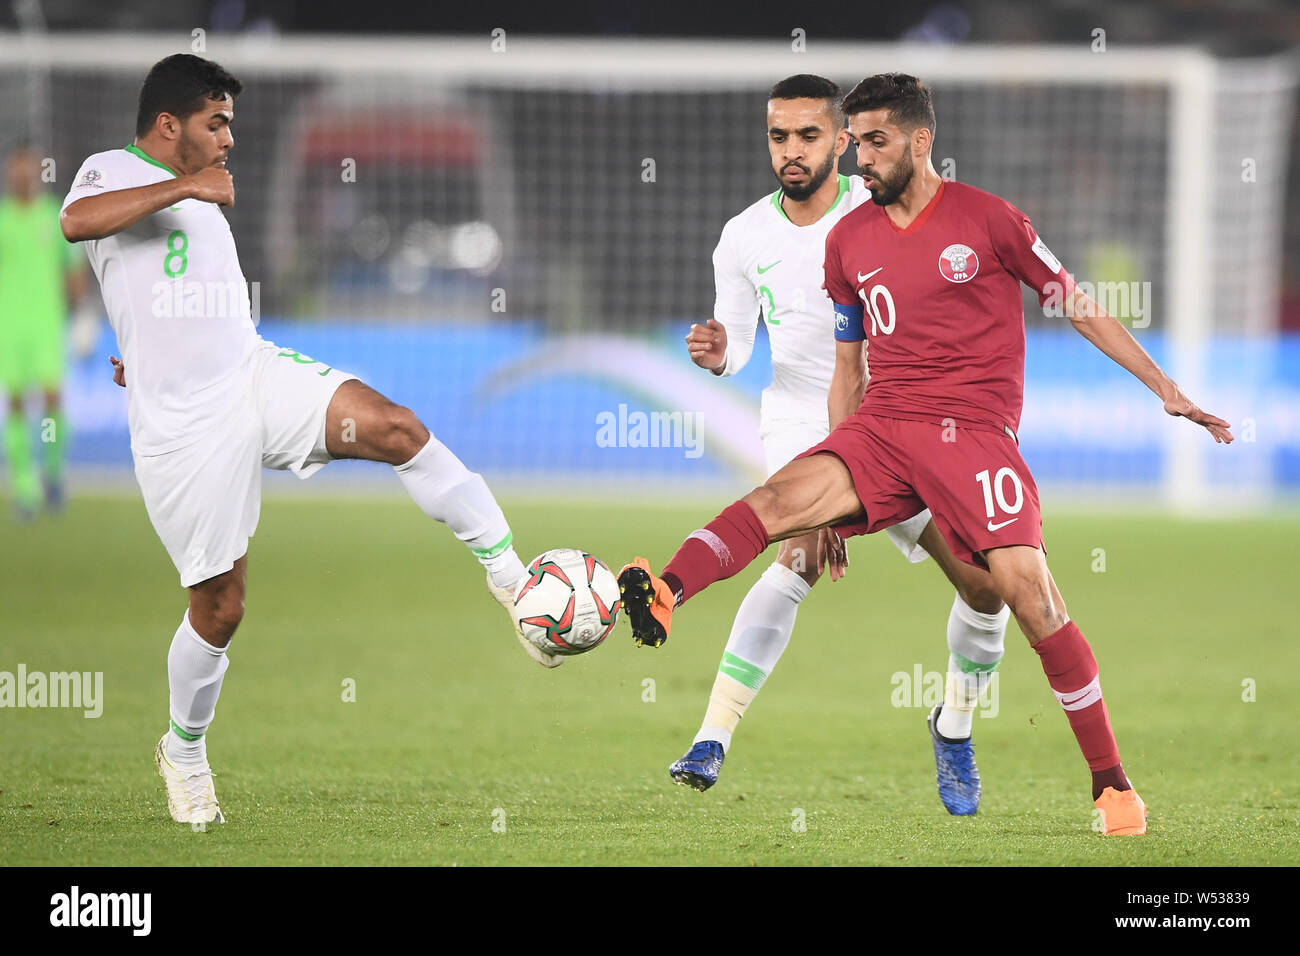 Hassan Al-Haydos, right, of Qatar challenges Yahya Al-Shehri of Saudi Arabia in the 2019 AFC Asian Cup group E football match between Saudi Arabia and Stock Photo